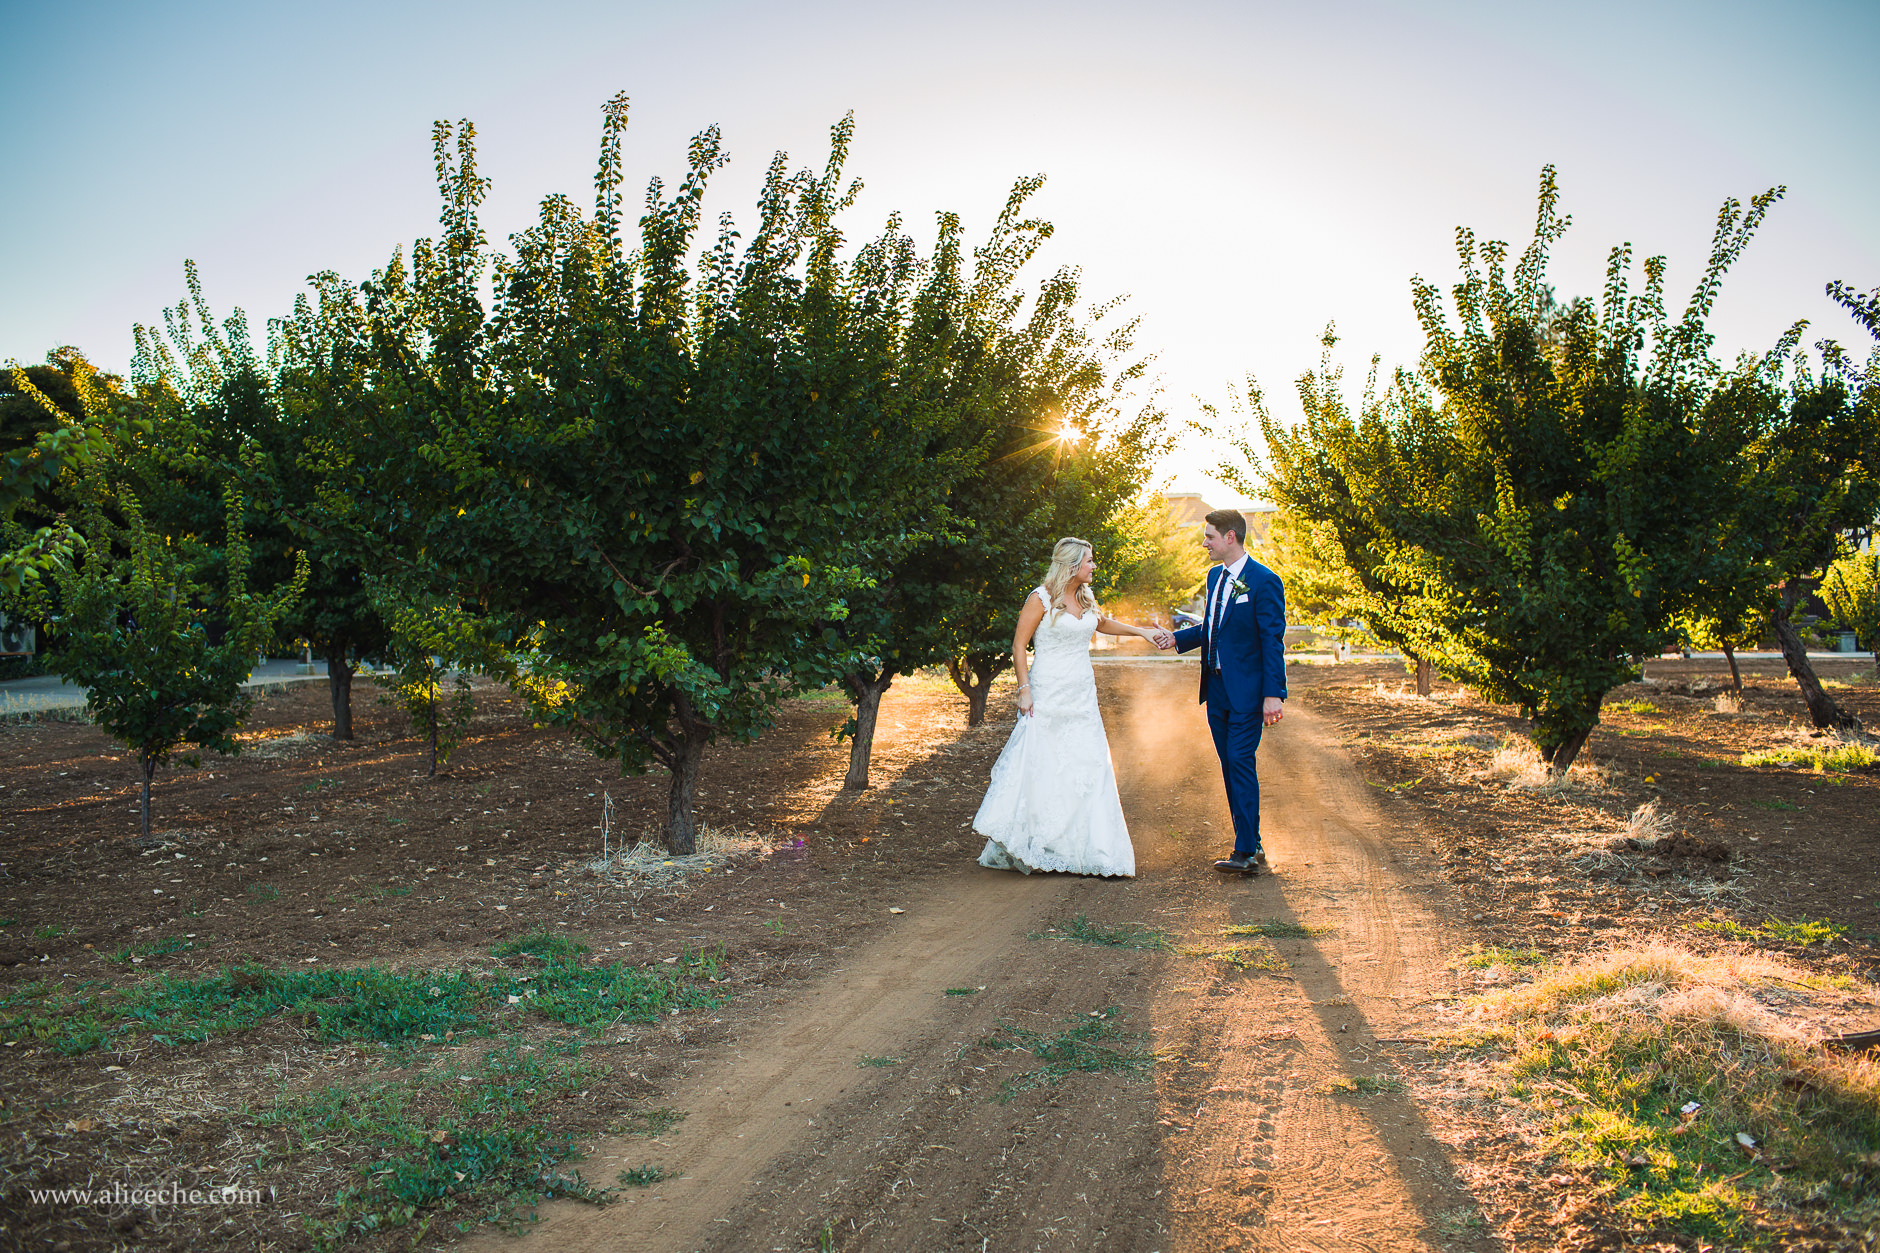 Los Altos History Museum Wedding Bride and Groom in the Orchard at Sunset